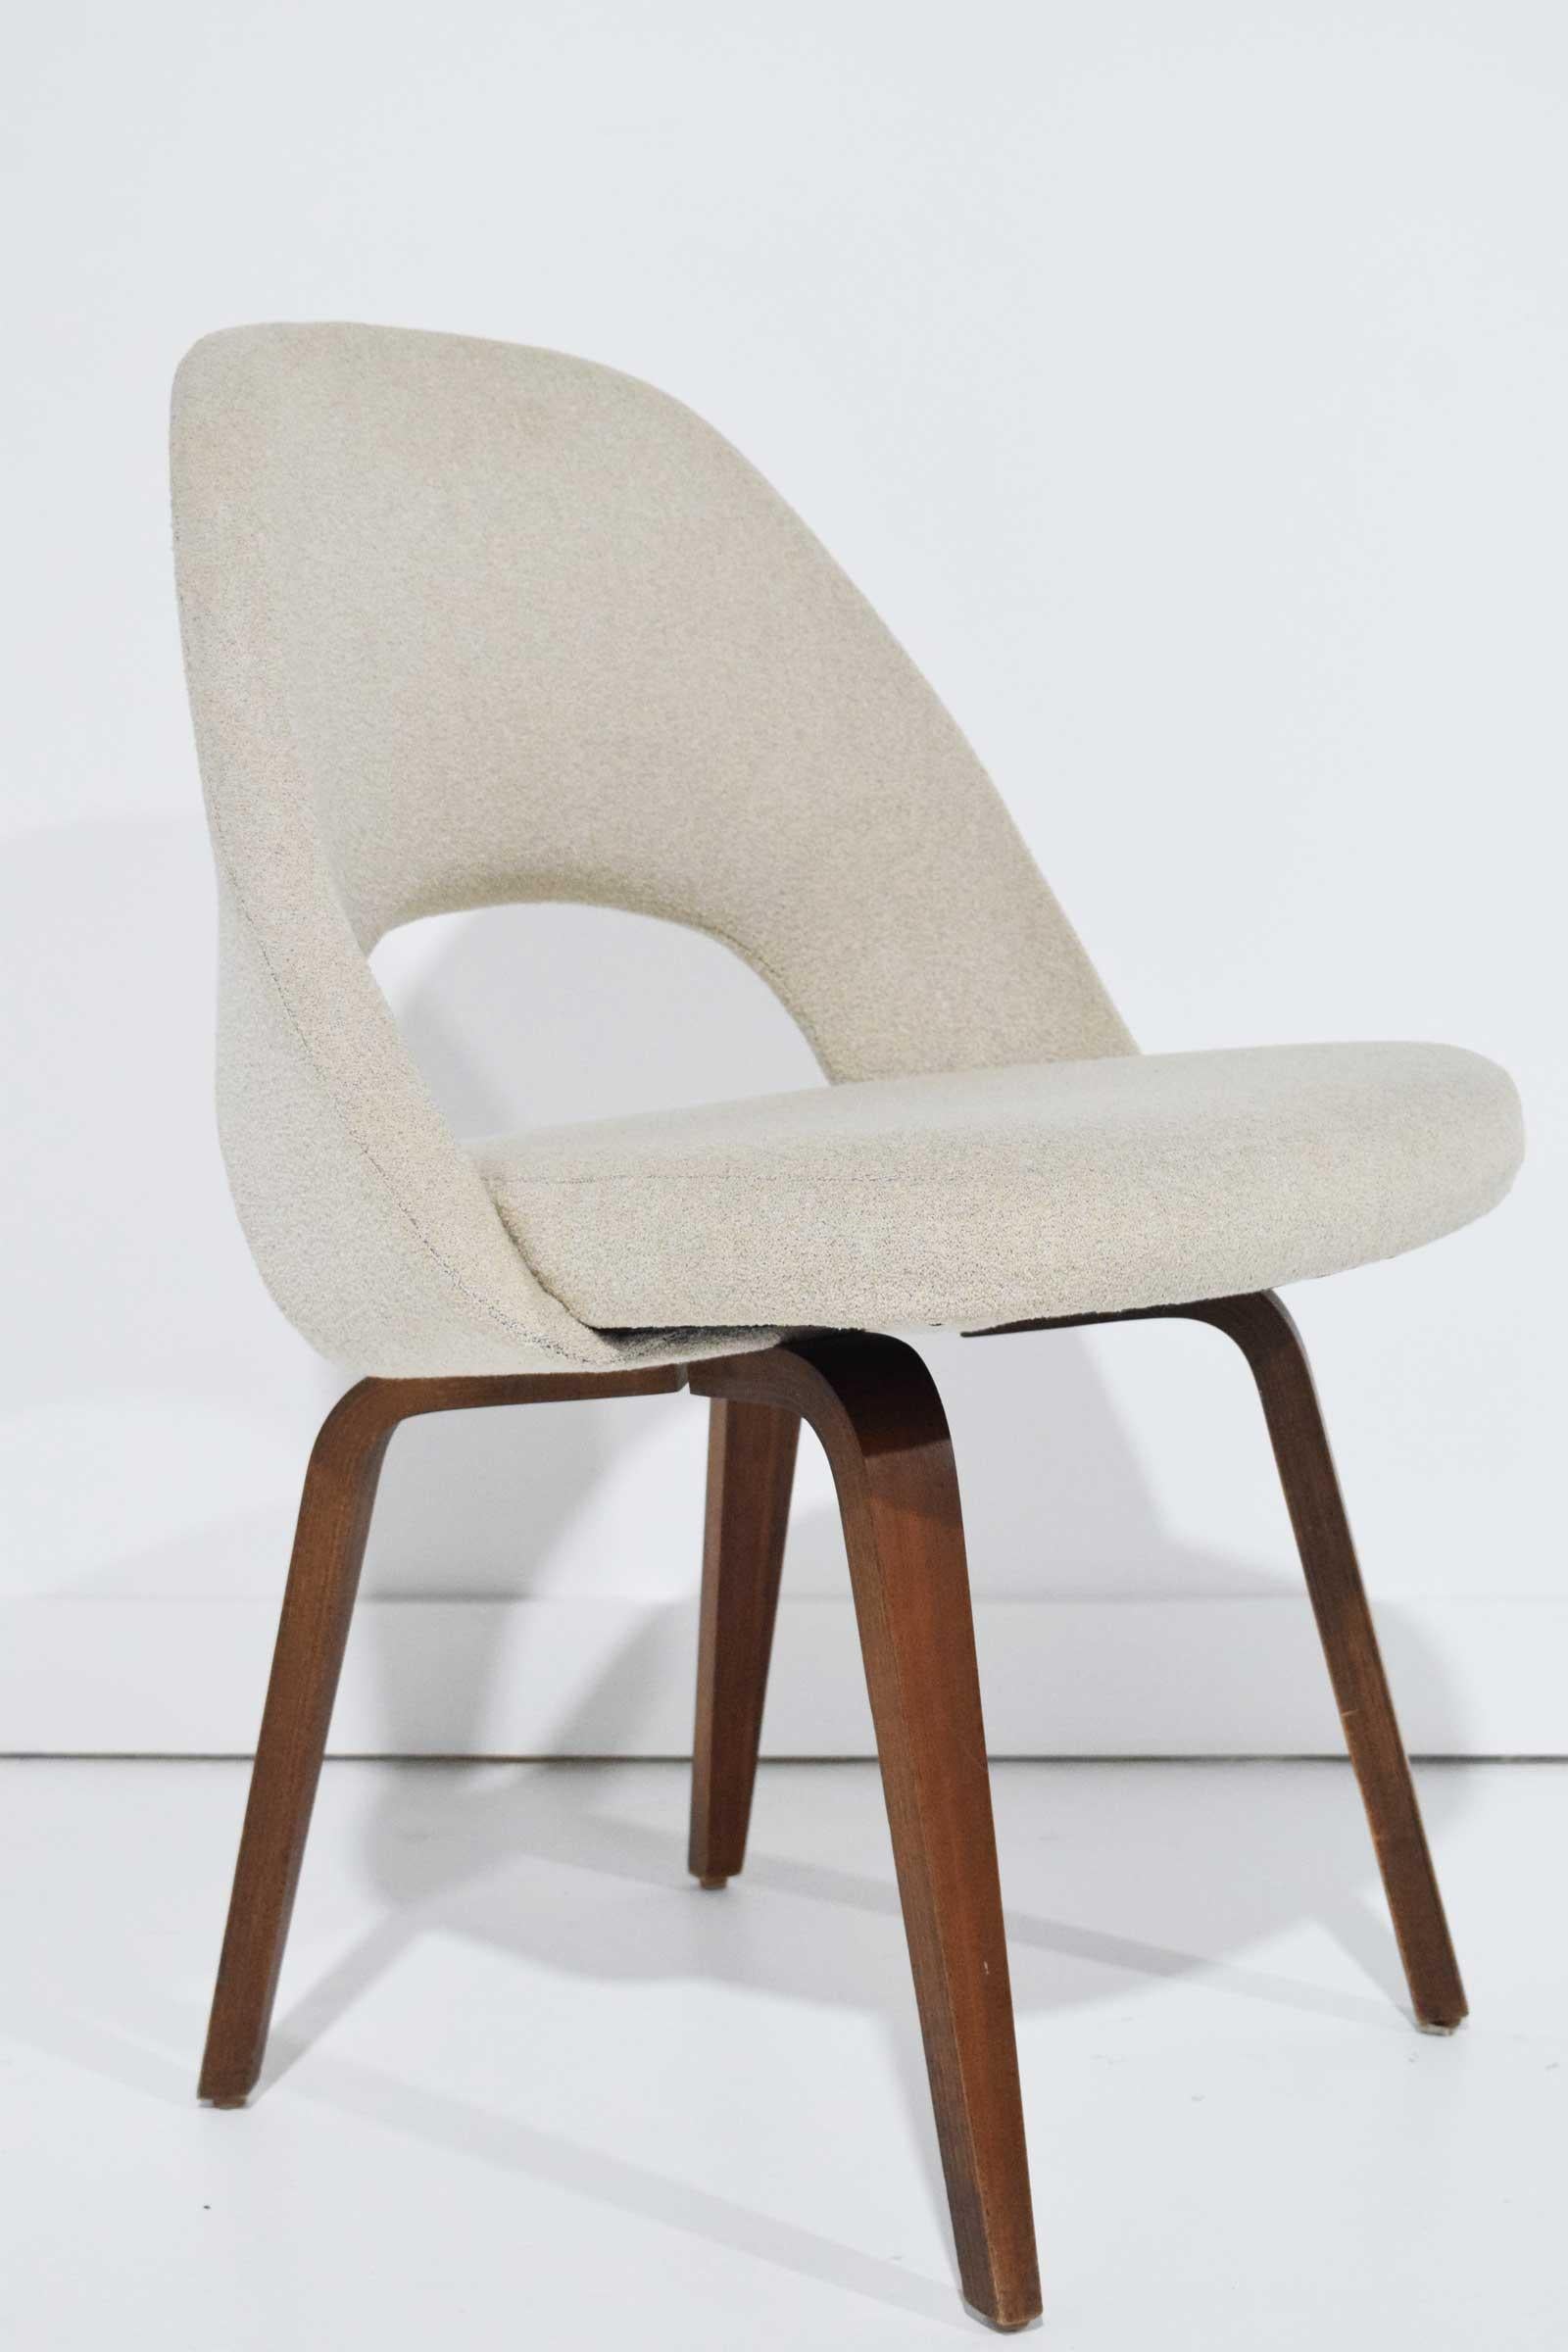 Mid-Century Modern Eero Saarinen for Knoll Executive Dining Chairs in Off-White